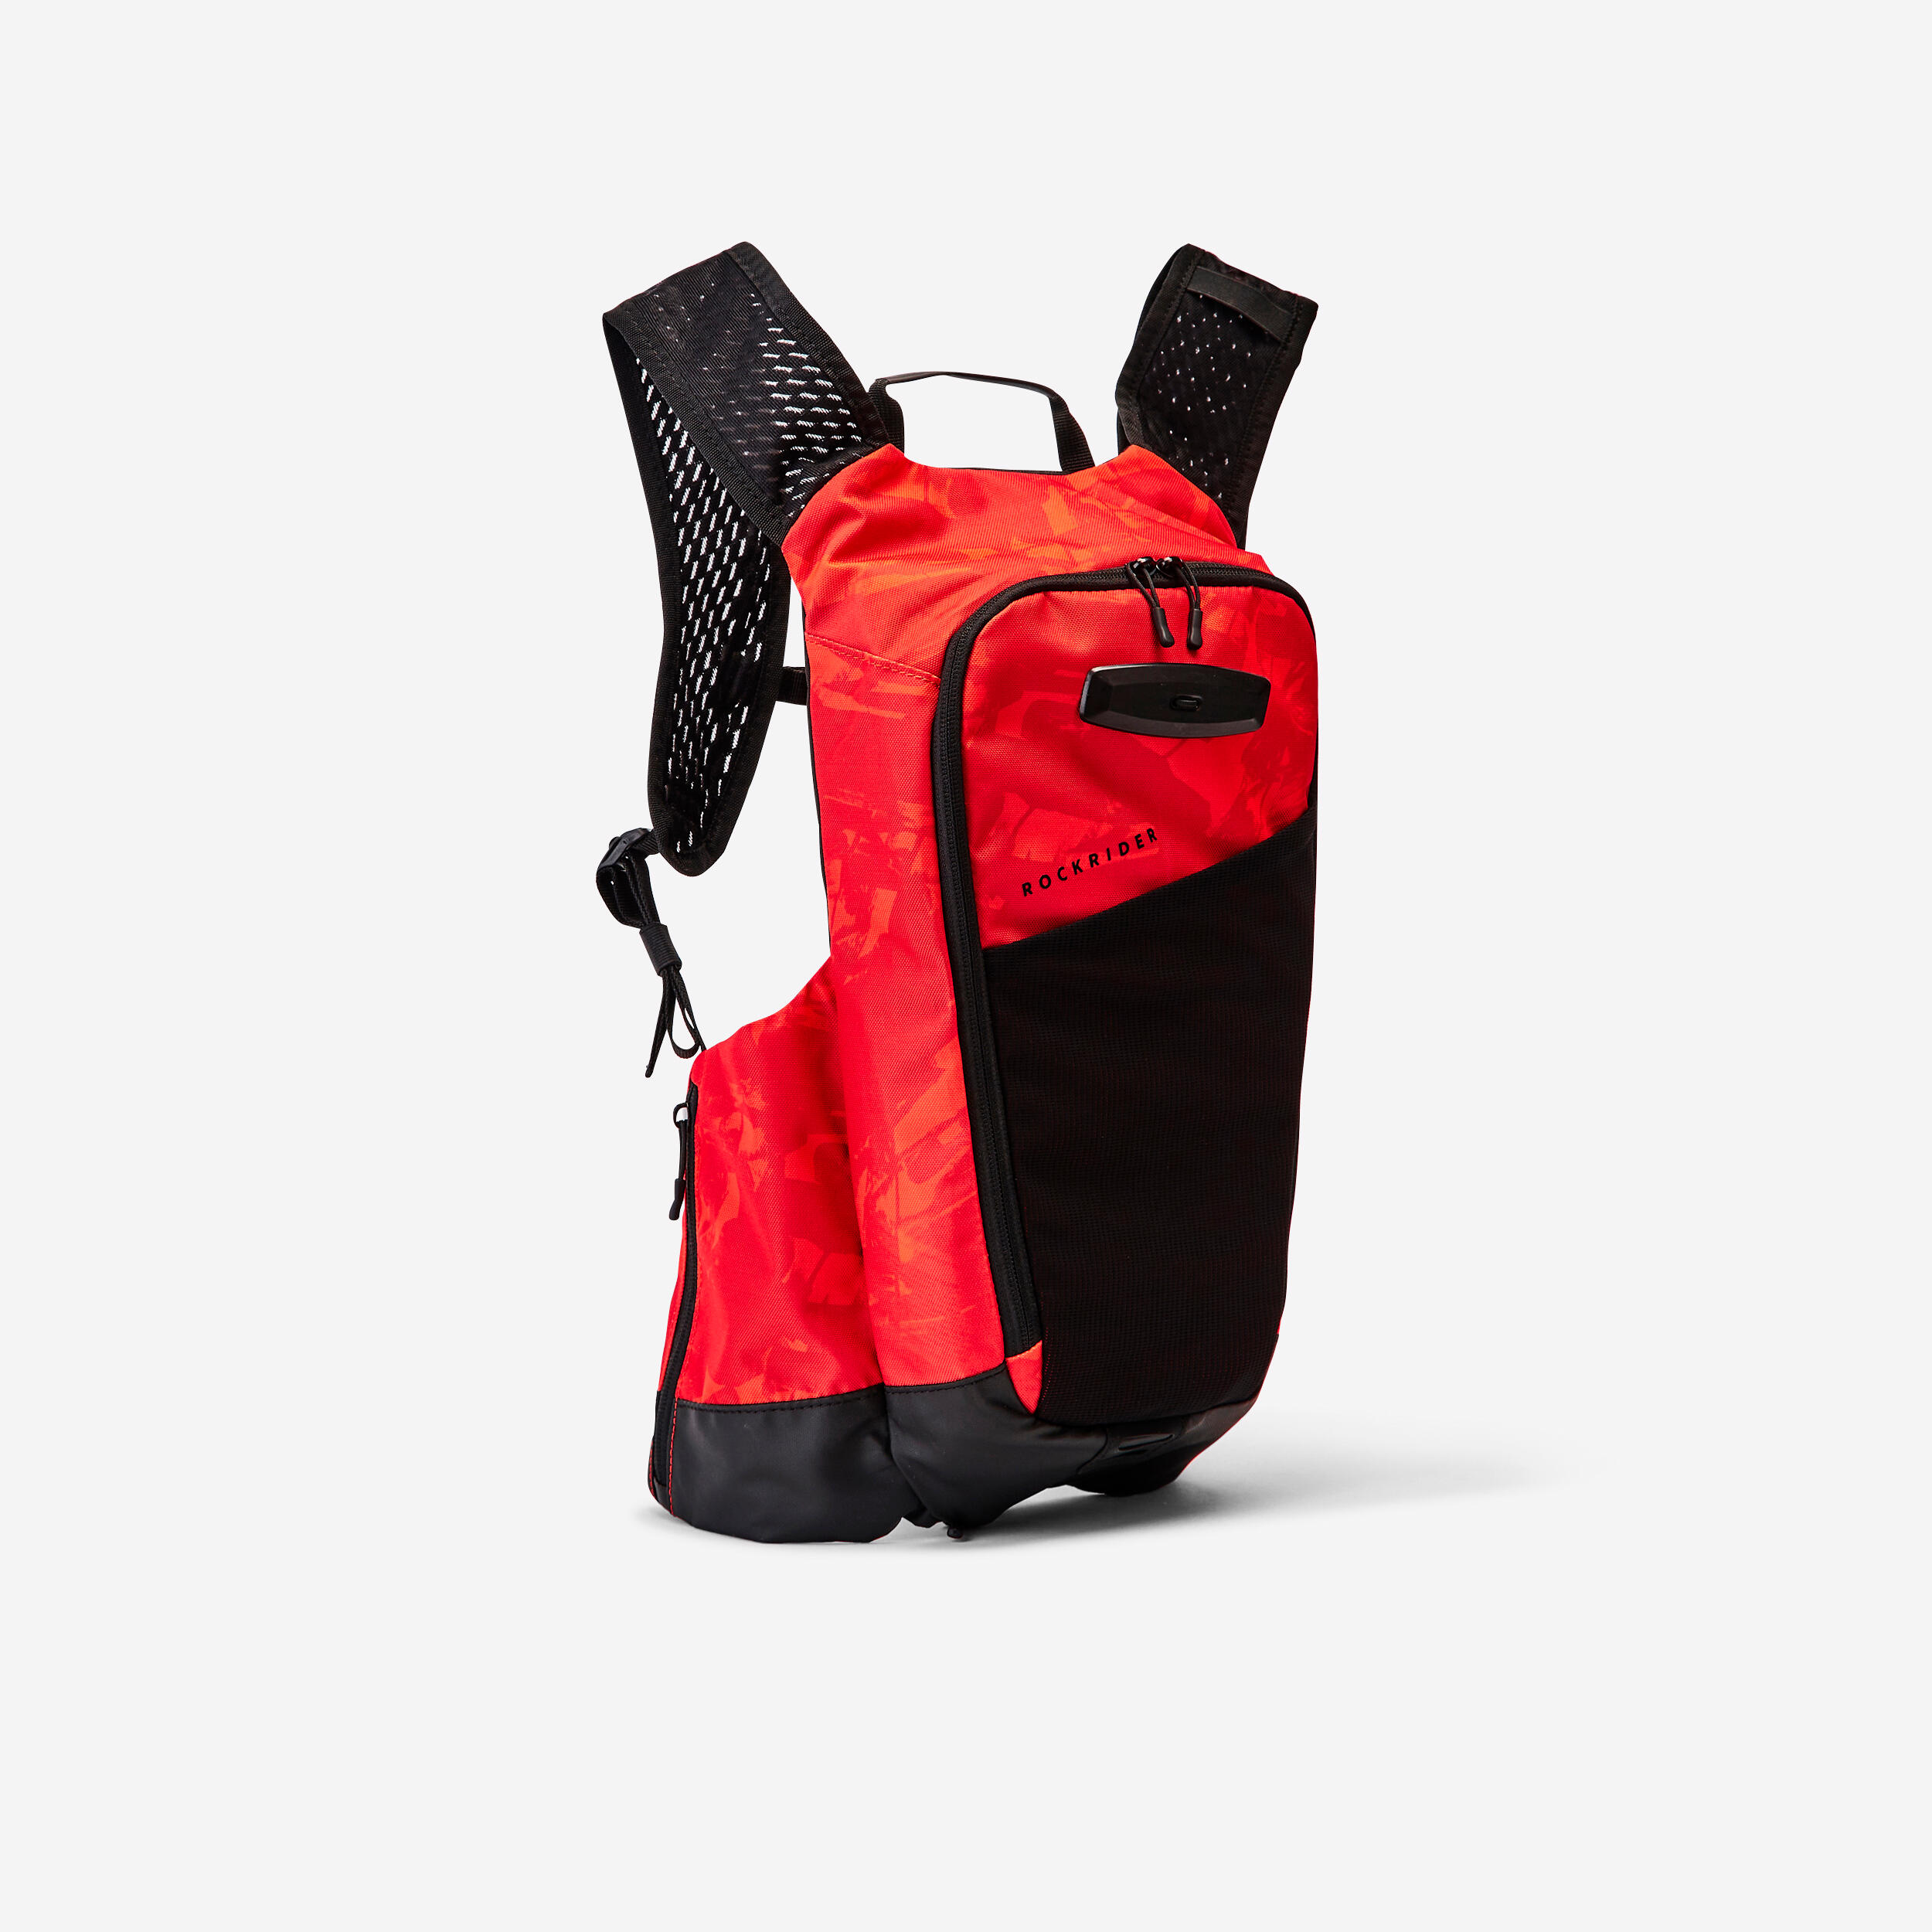 Mountain Bike Hydration Backpack Explore 7L/2L Water - Red 2/13